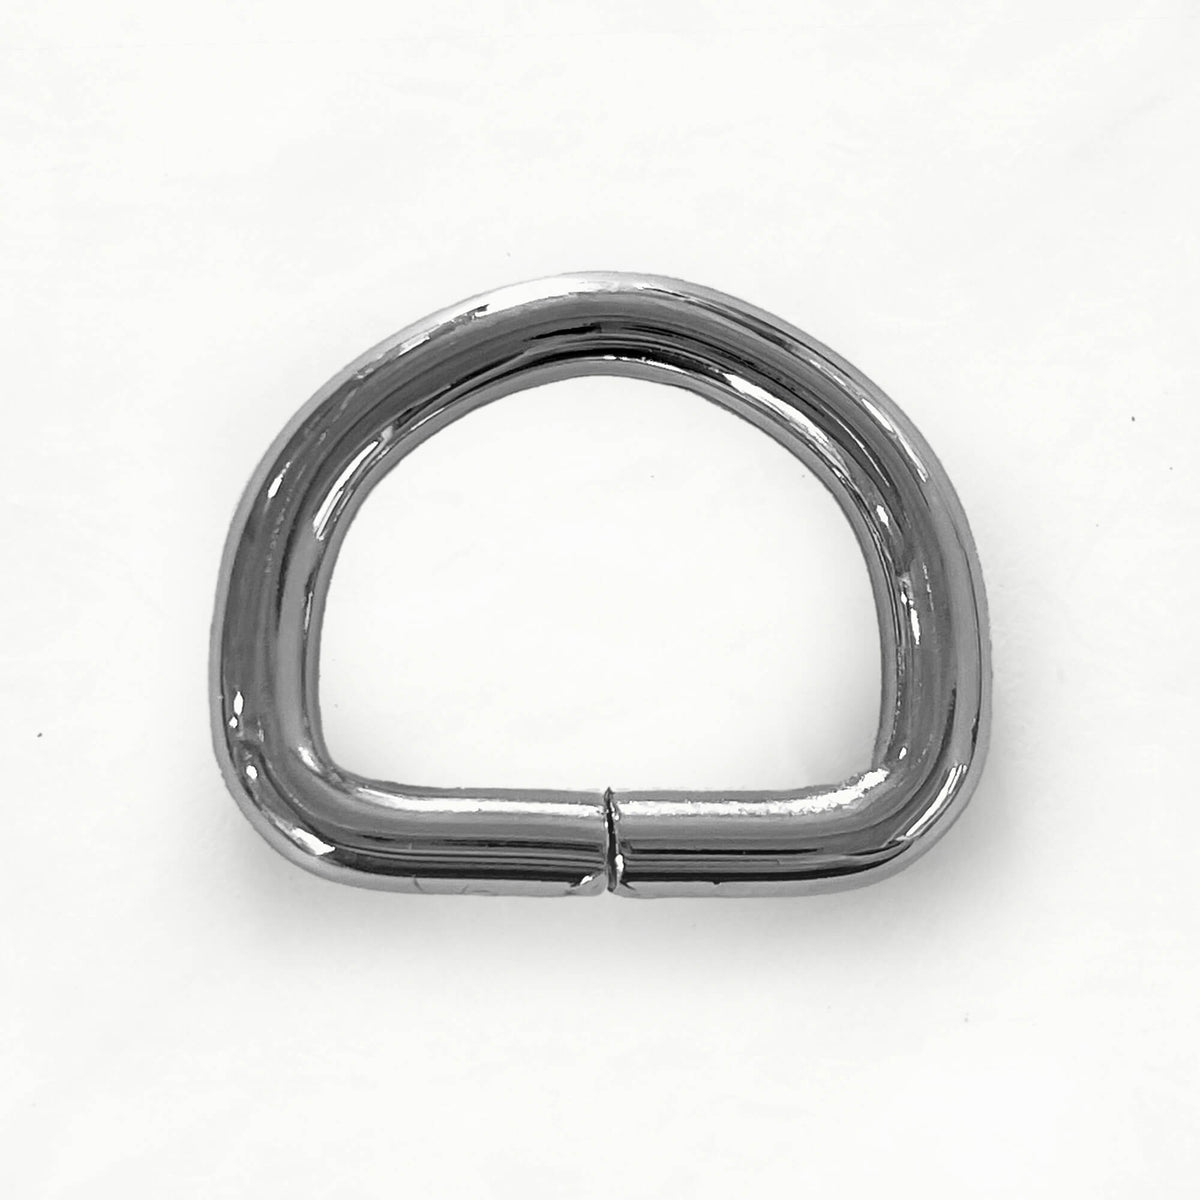 7/8" D-Ring - Silver